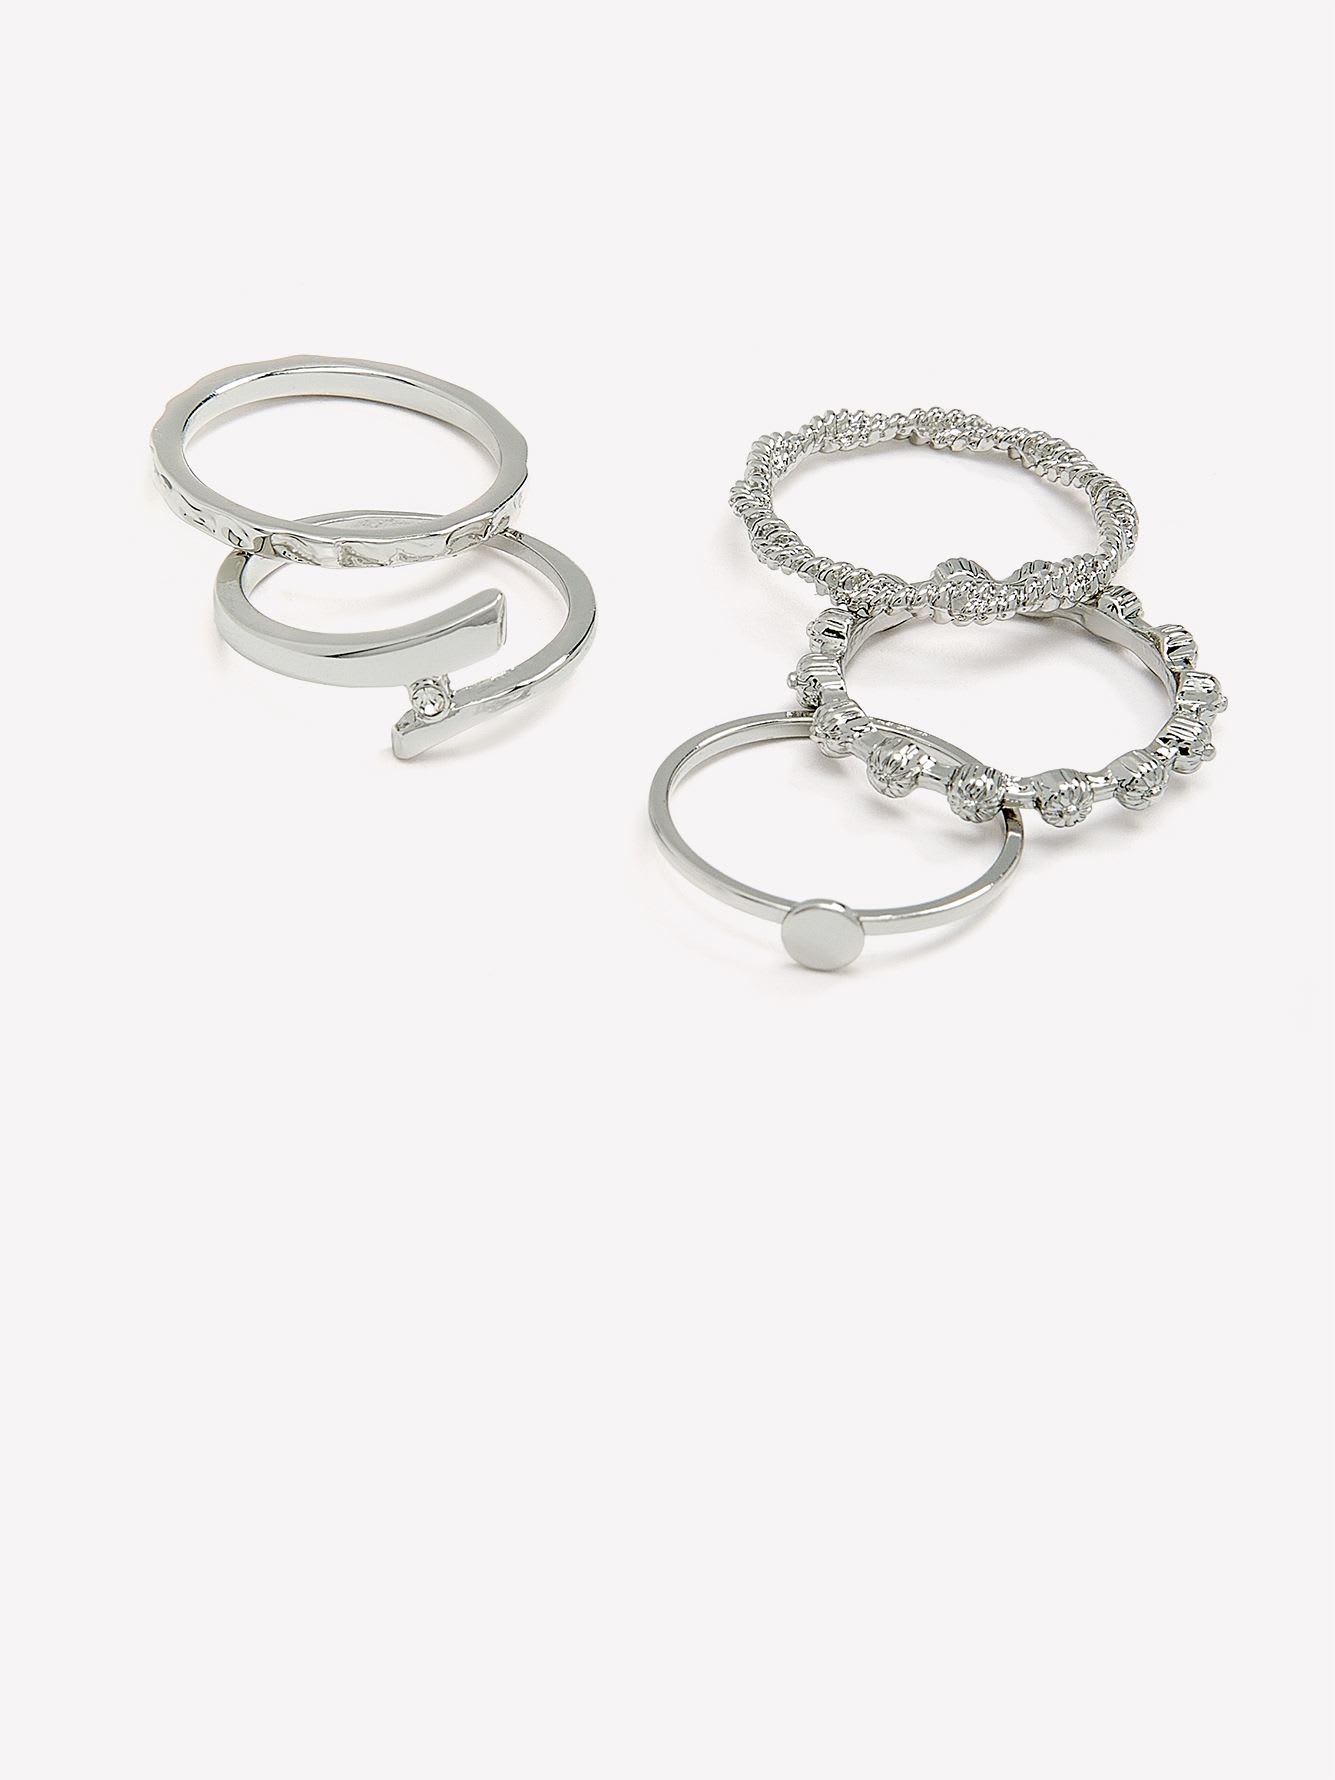 Assorted Rhodium-Plated Rings, Set of 5